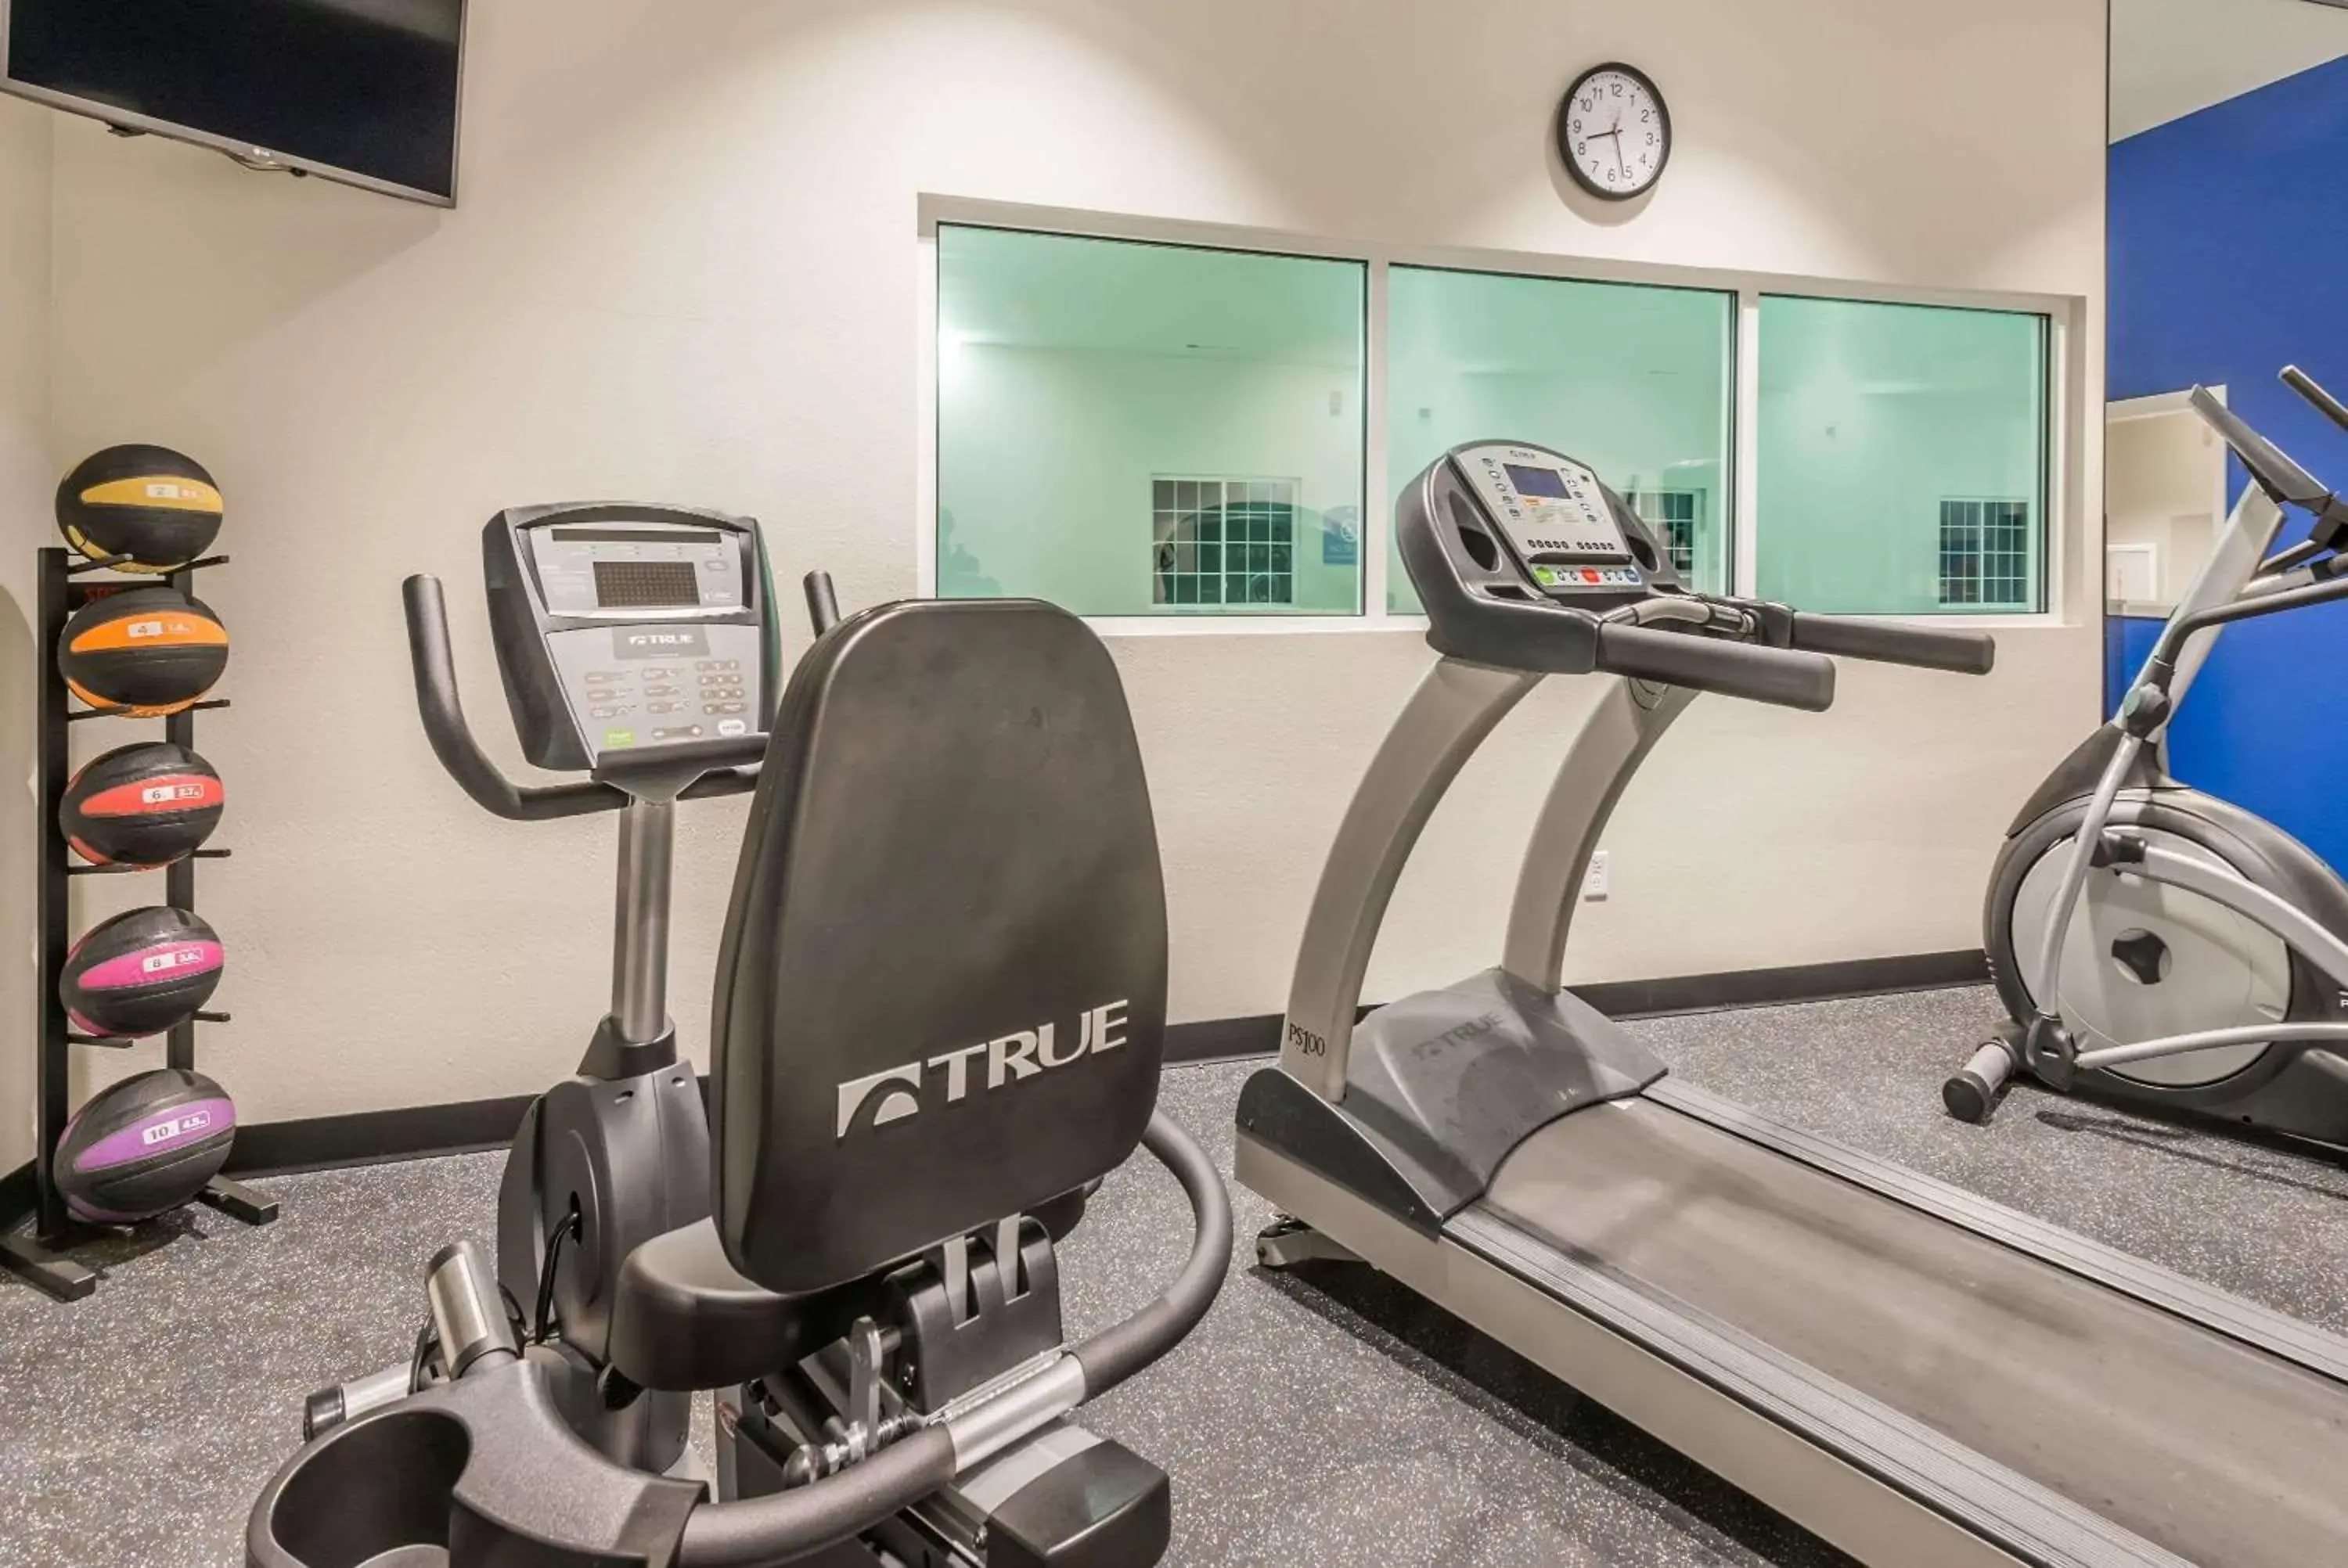 Fitness centre/facilities, Fitness Center/Facilities in Microtel Inn & Suites by Wyndham Altoona